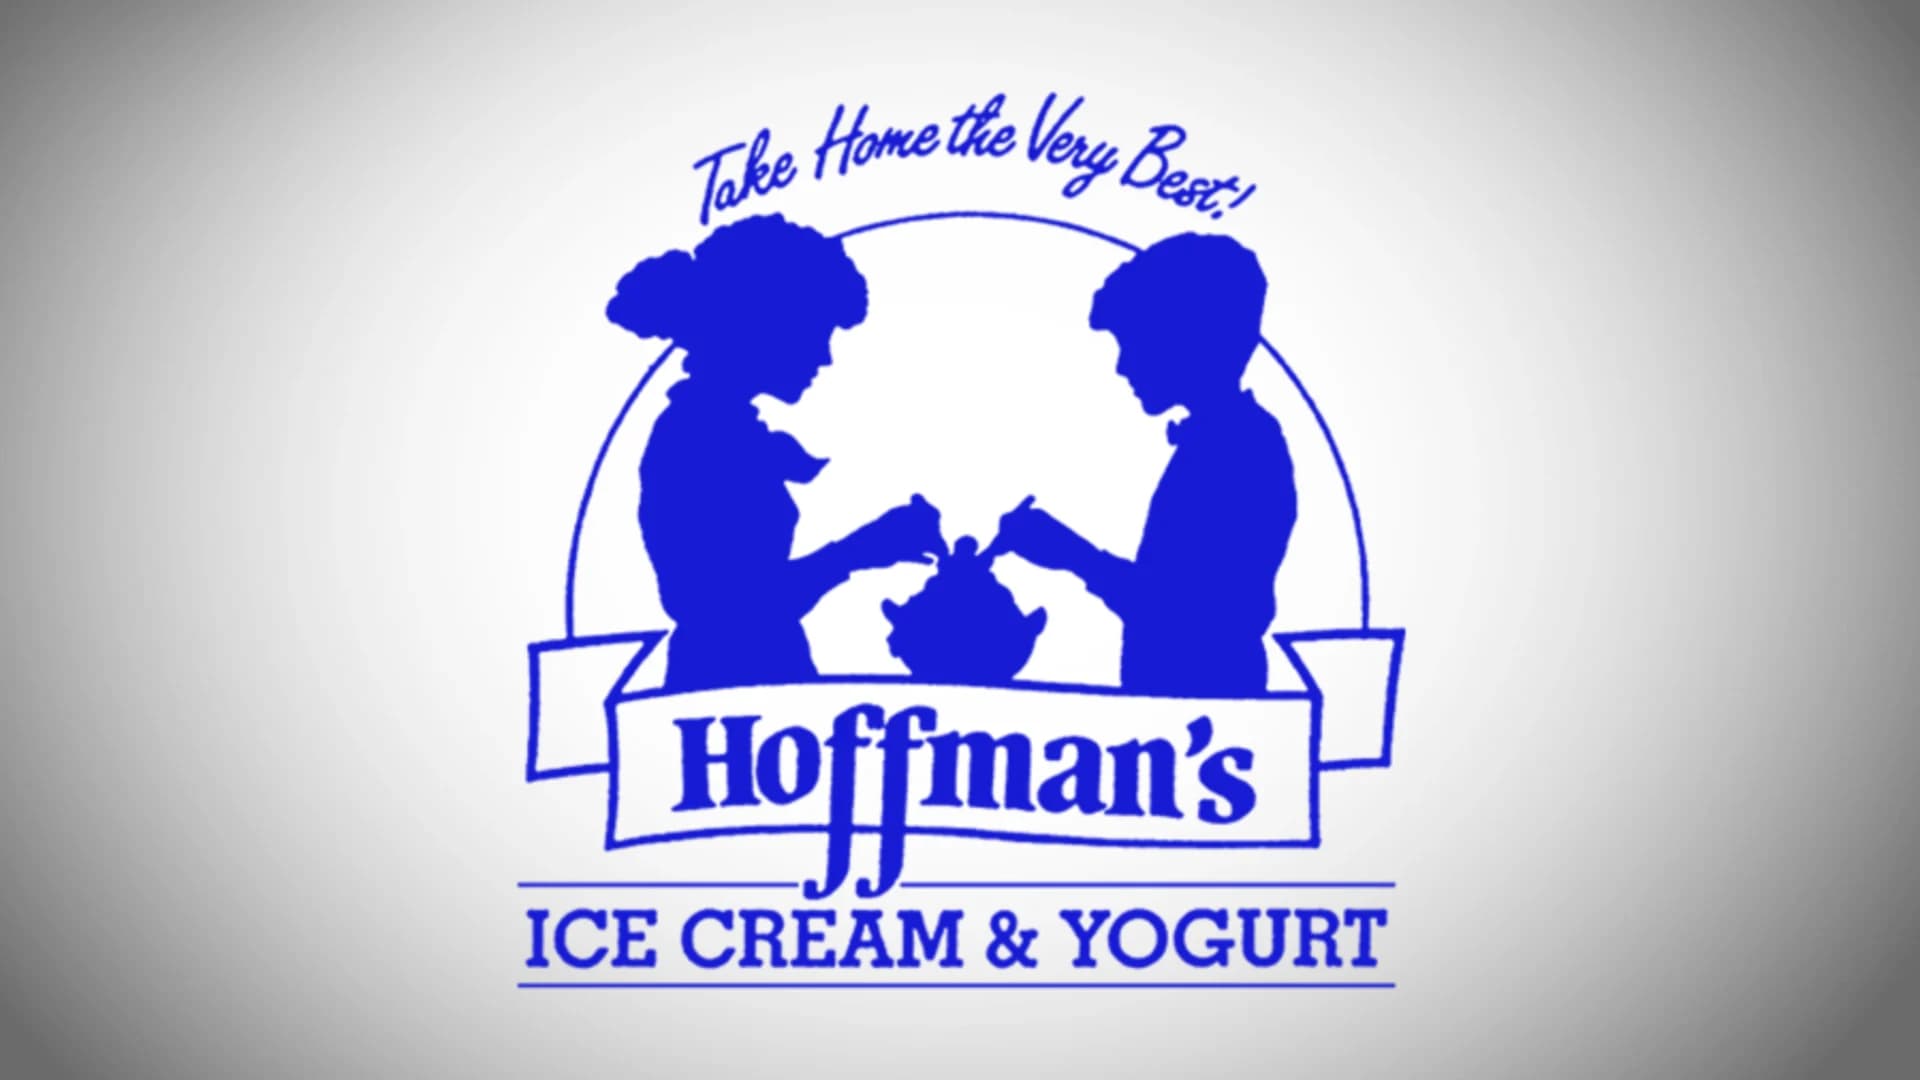 Jersey Shore favorite Hoffman's Ice Cream temporarily closes location for renovations